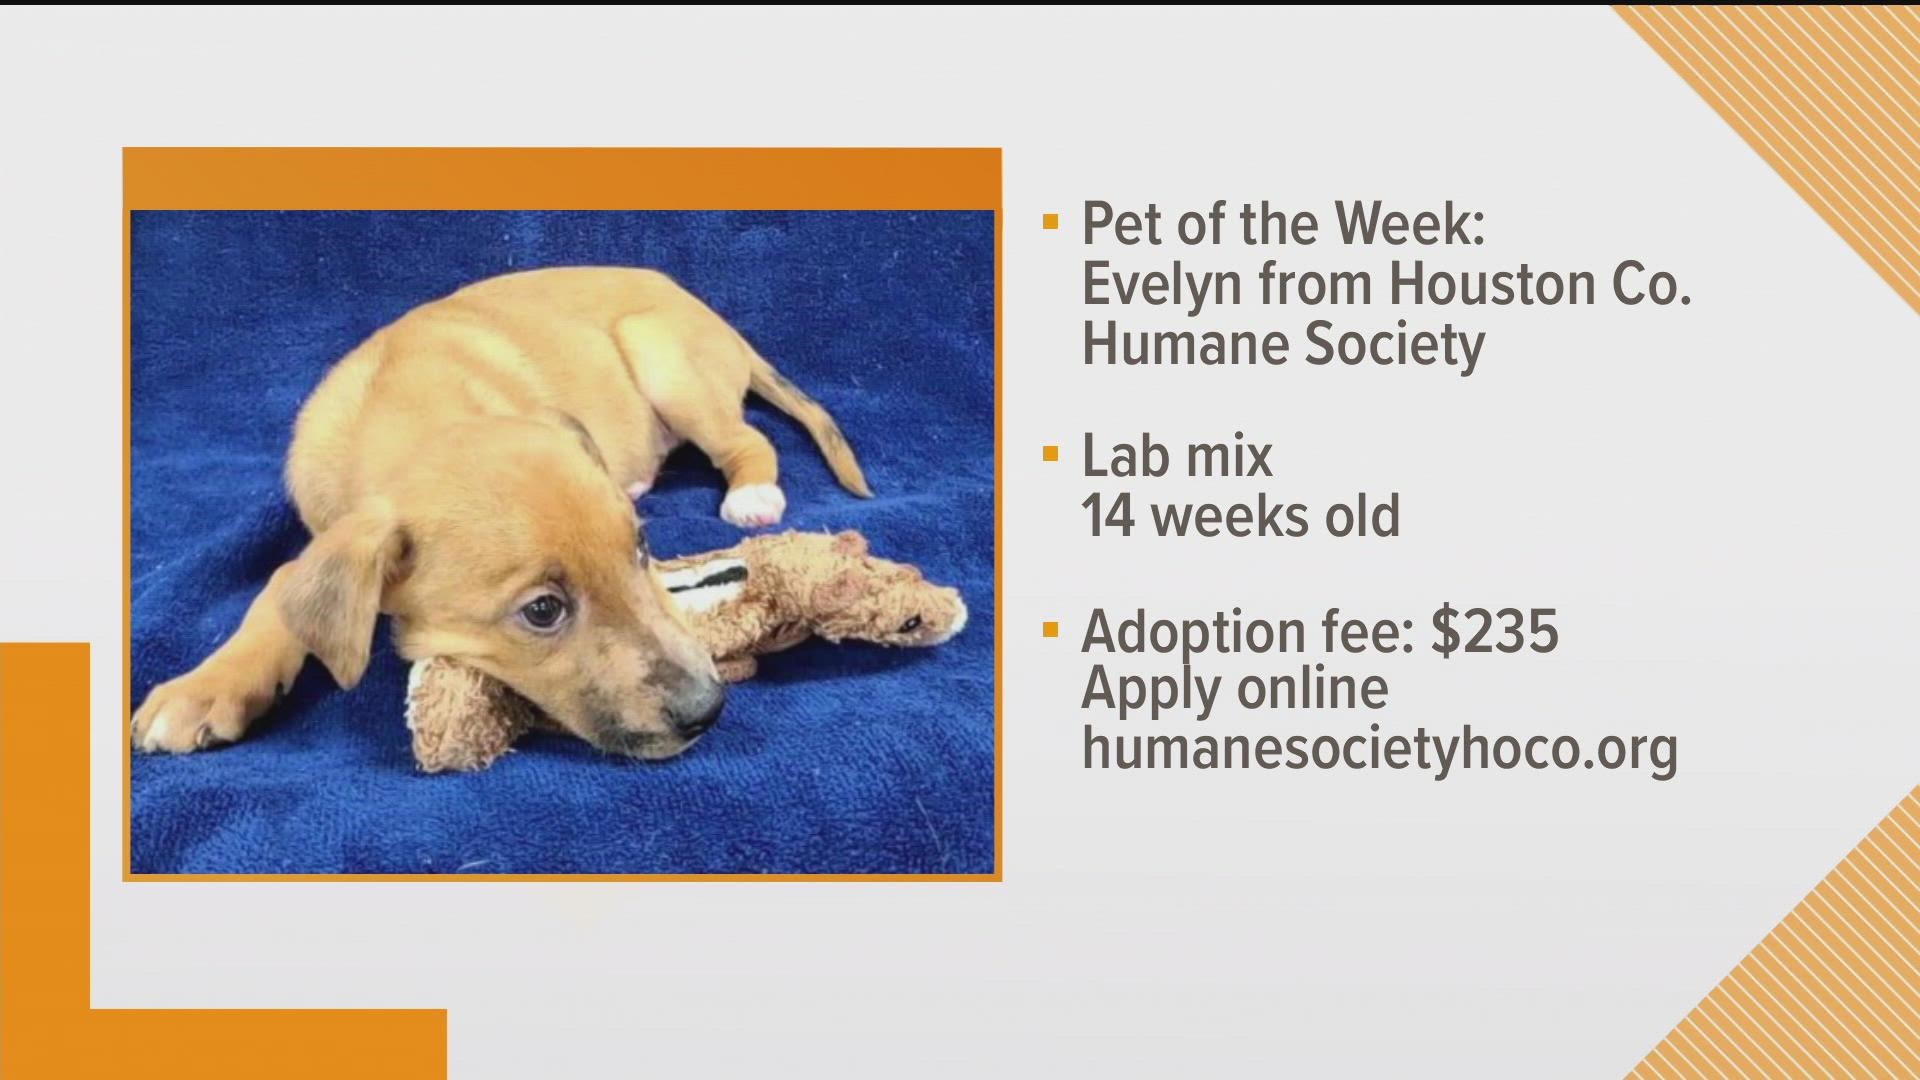 Evelyn is available for adoption from the Houston County Humane Society